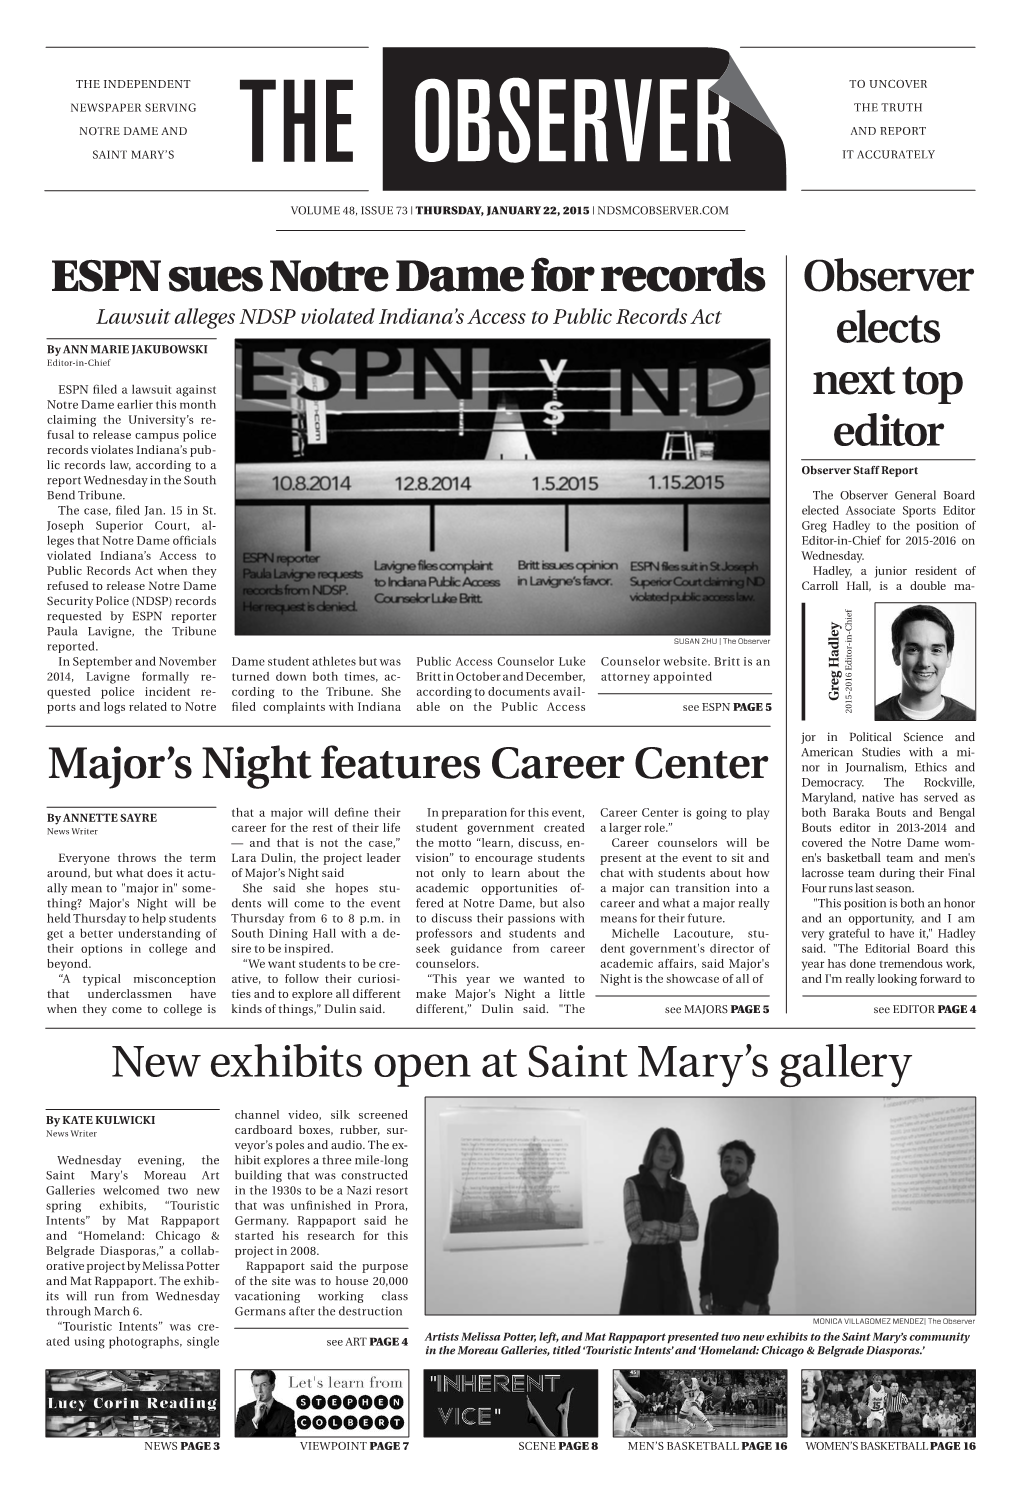 Espn Sues Notre Dame for Records Observer Elects Next Top Editor